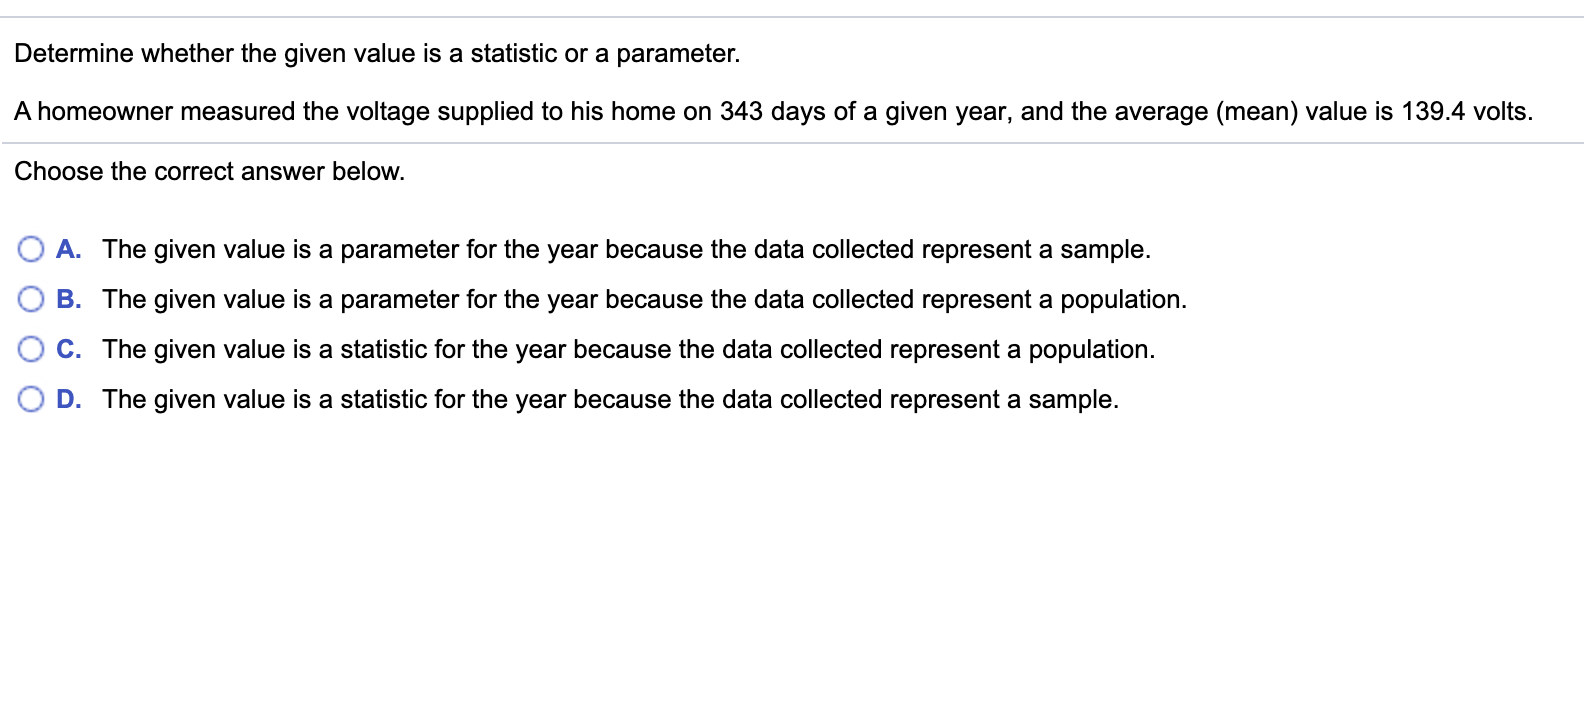 Determine whether the given value is a statistic or a parameter.
A homeowner measured the voltage supplied to his home on 343 days of a given year, and the average (mean) value is 139.4 volts.
Choose the correct answer below.
O A. The given value is a parameter for the year because the data collected represent a sample.
B. The given value is a parameter for the year because the data collected represent a population.
C. The given value is a statistic for the year because the data collected represent a population.
D. The given value is a statistic for the year because the data collected represent a sample.
